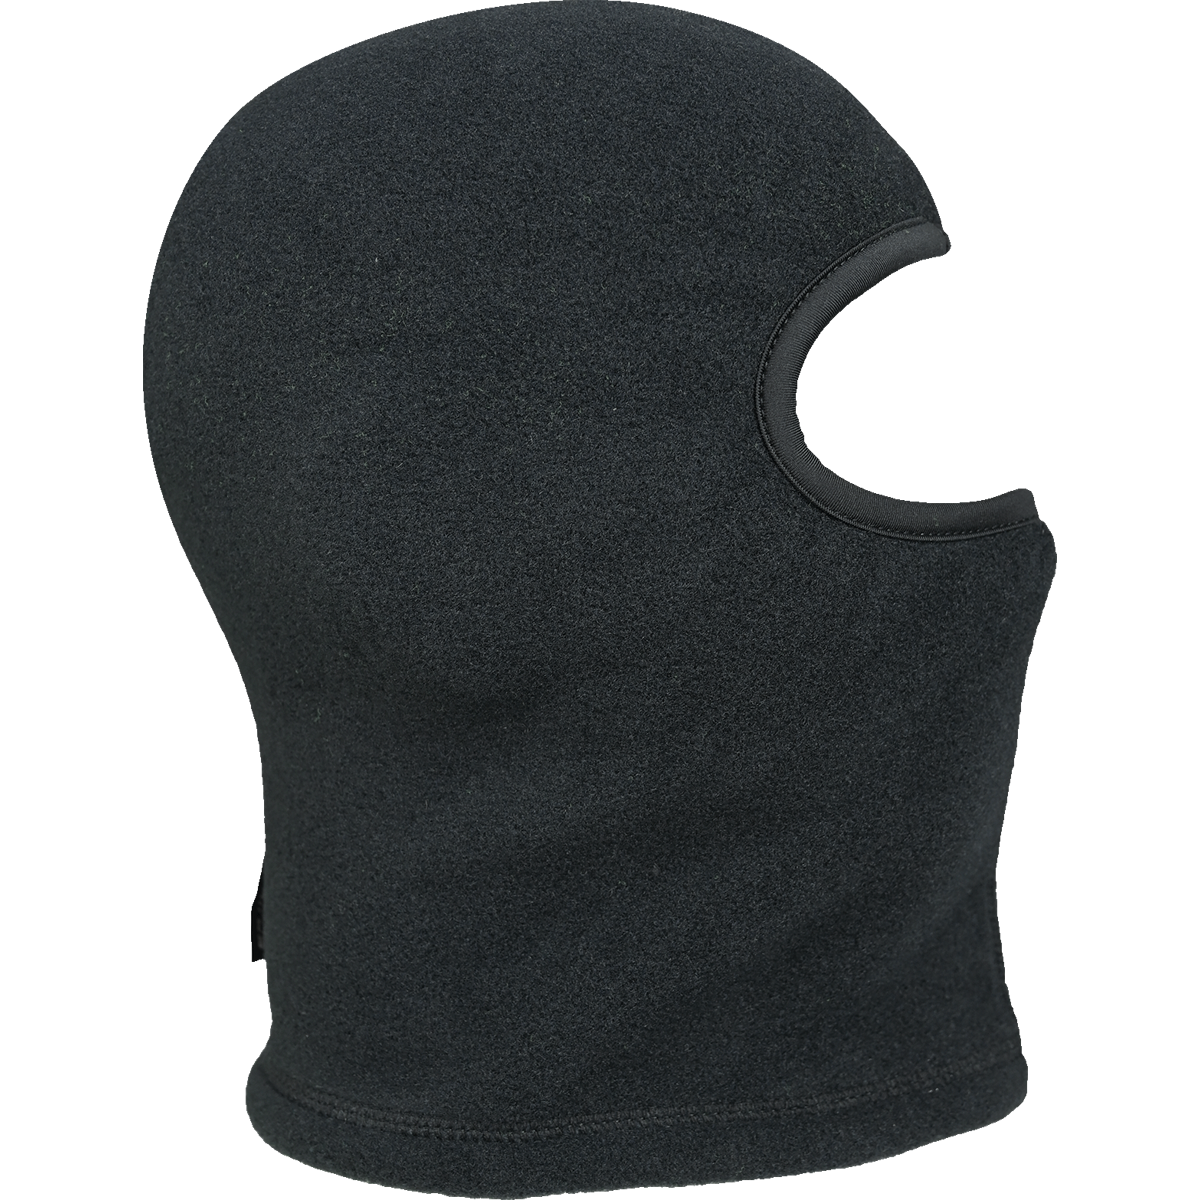 Colored Face Covering And Neck Gaiter - Casual & Sports Wear - Sports & Toys